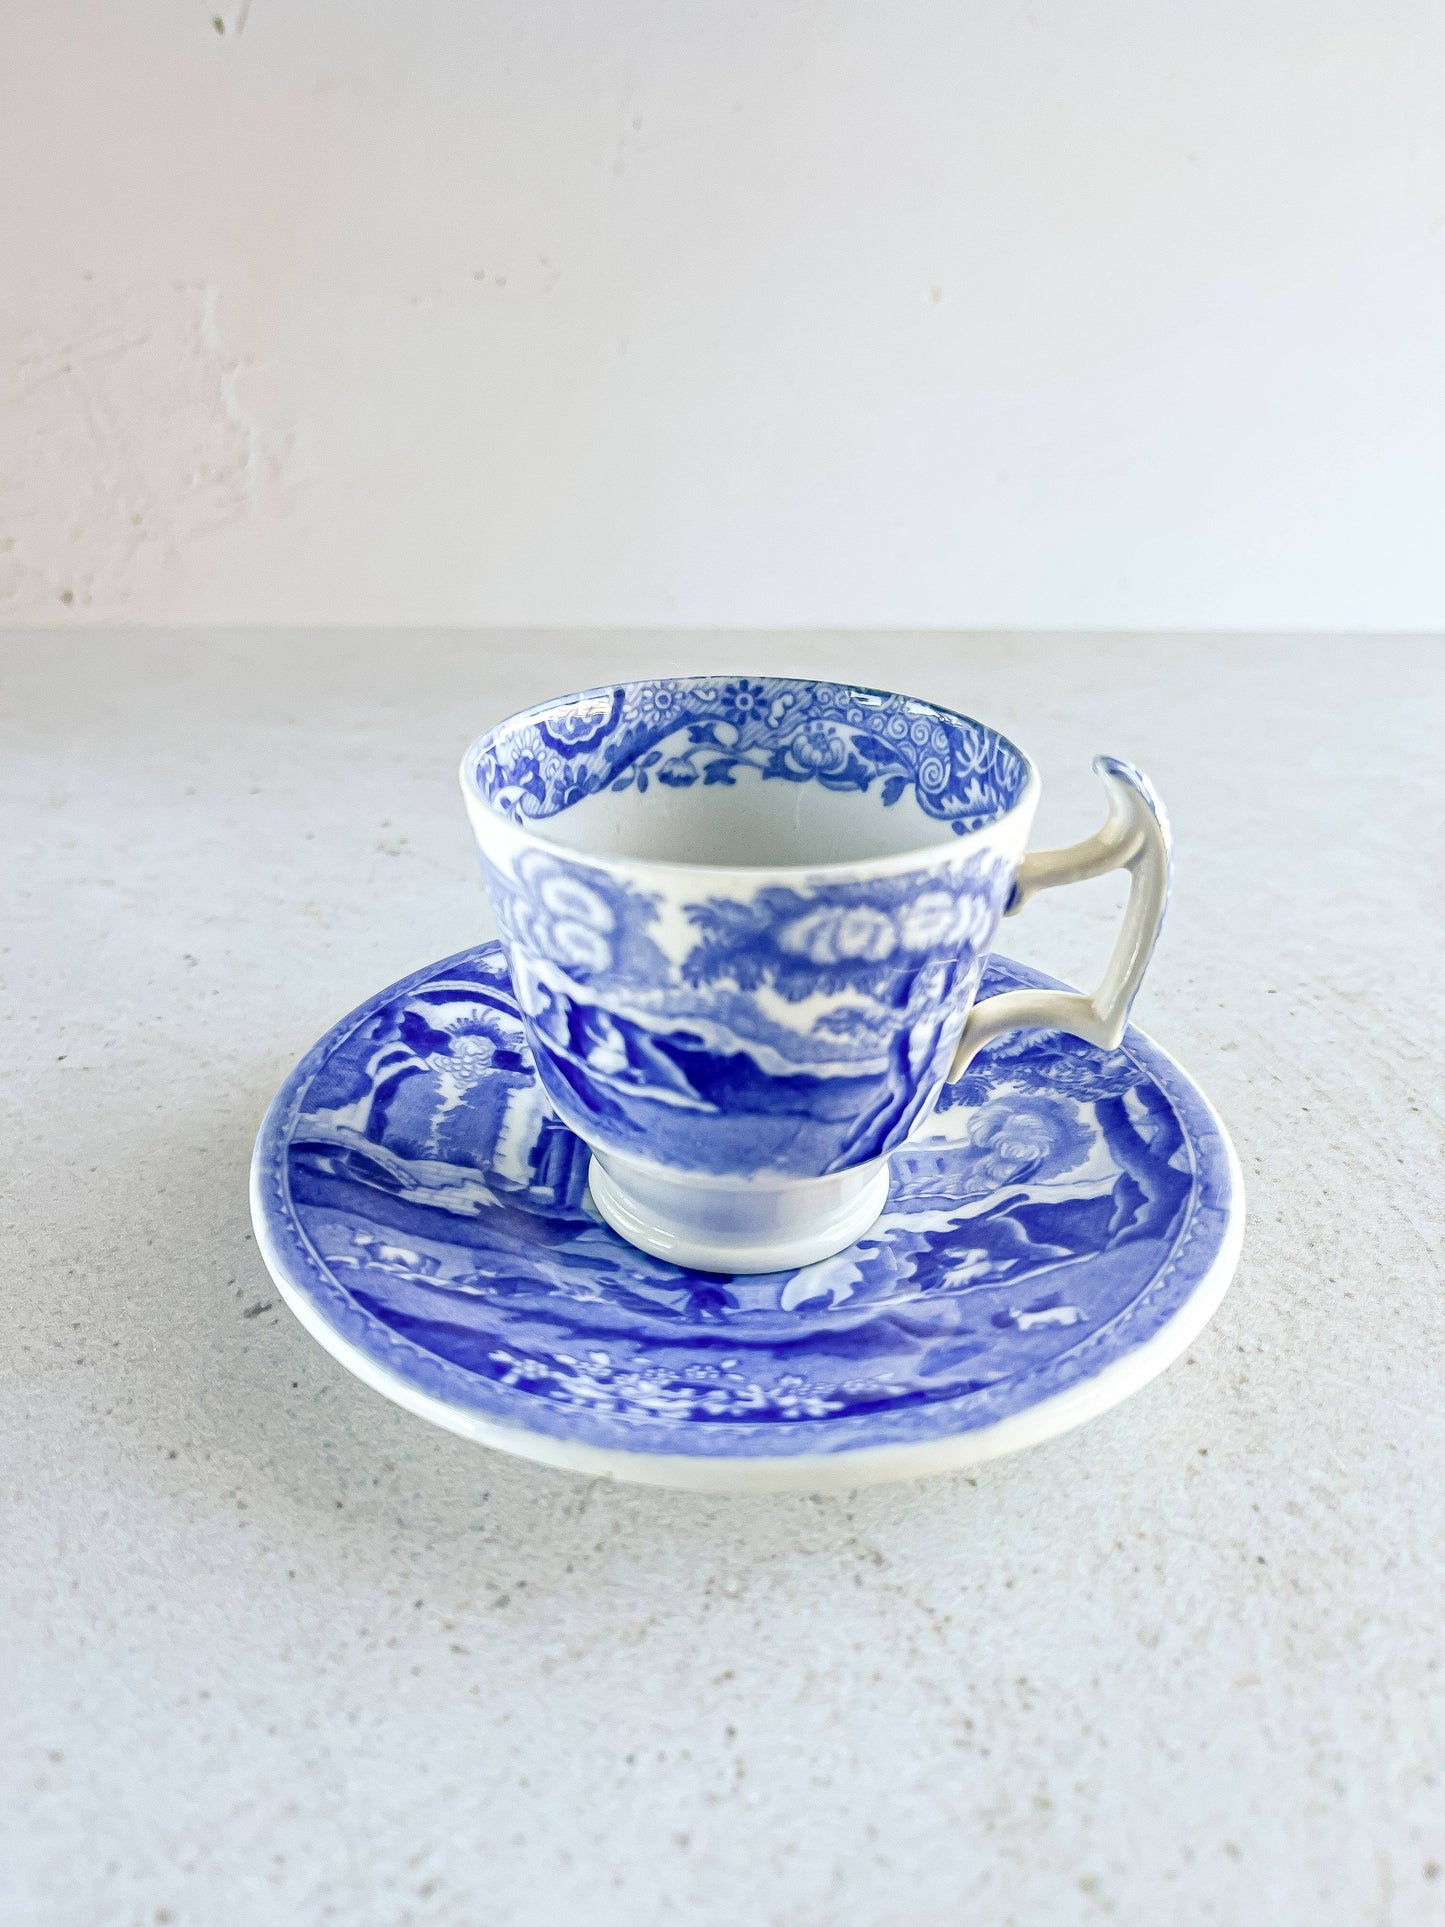 Copeland Spode Footed Demitasse Cup and Saucer Set - ‘Blue Italian’ Collection (Older Version) - SOSC Home